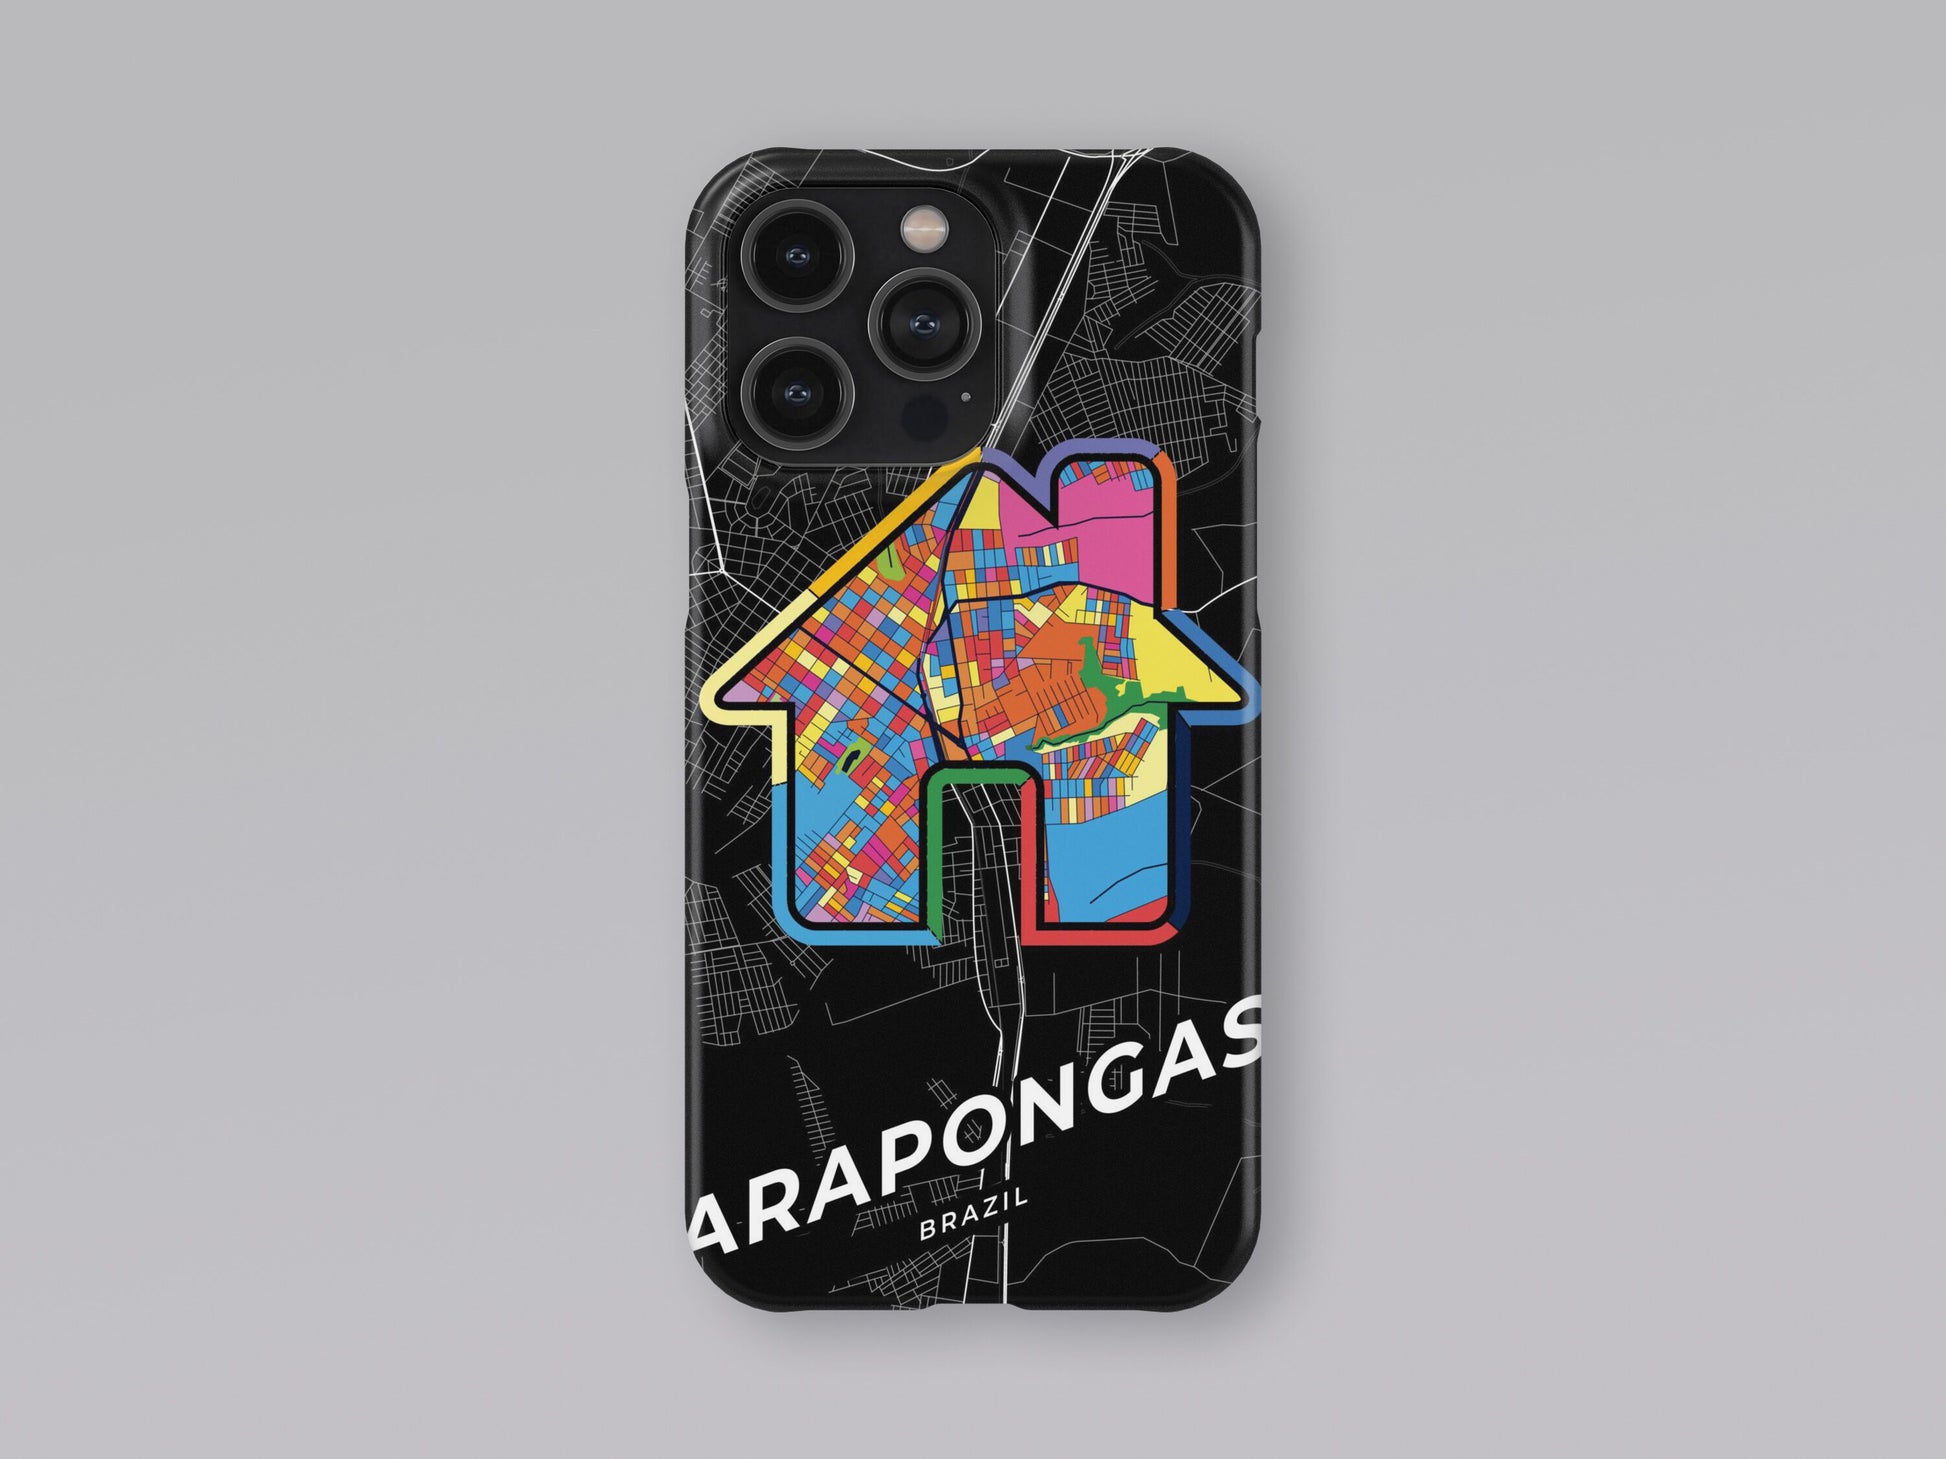 Arapongas Brazil slim phone case with colorful icon. Birthday, wedding or housewarming gift. Couple match cases. 3